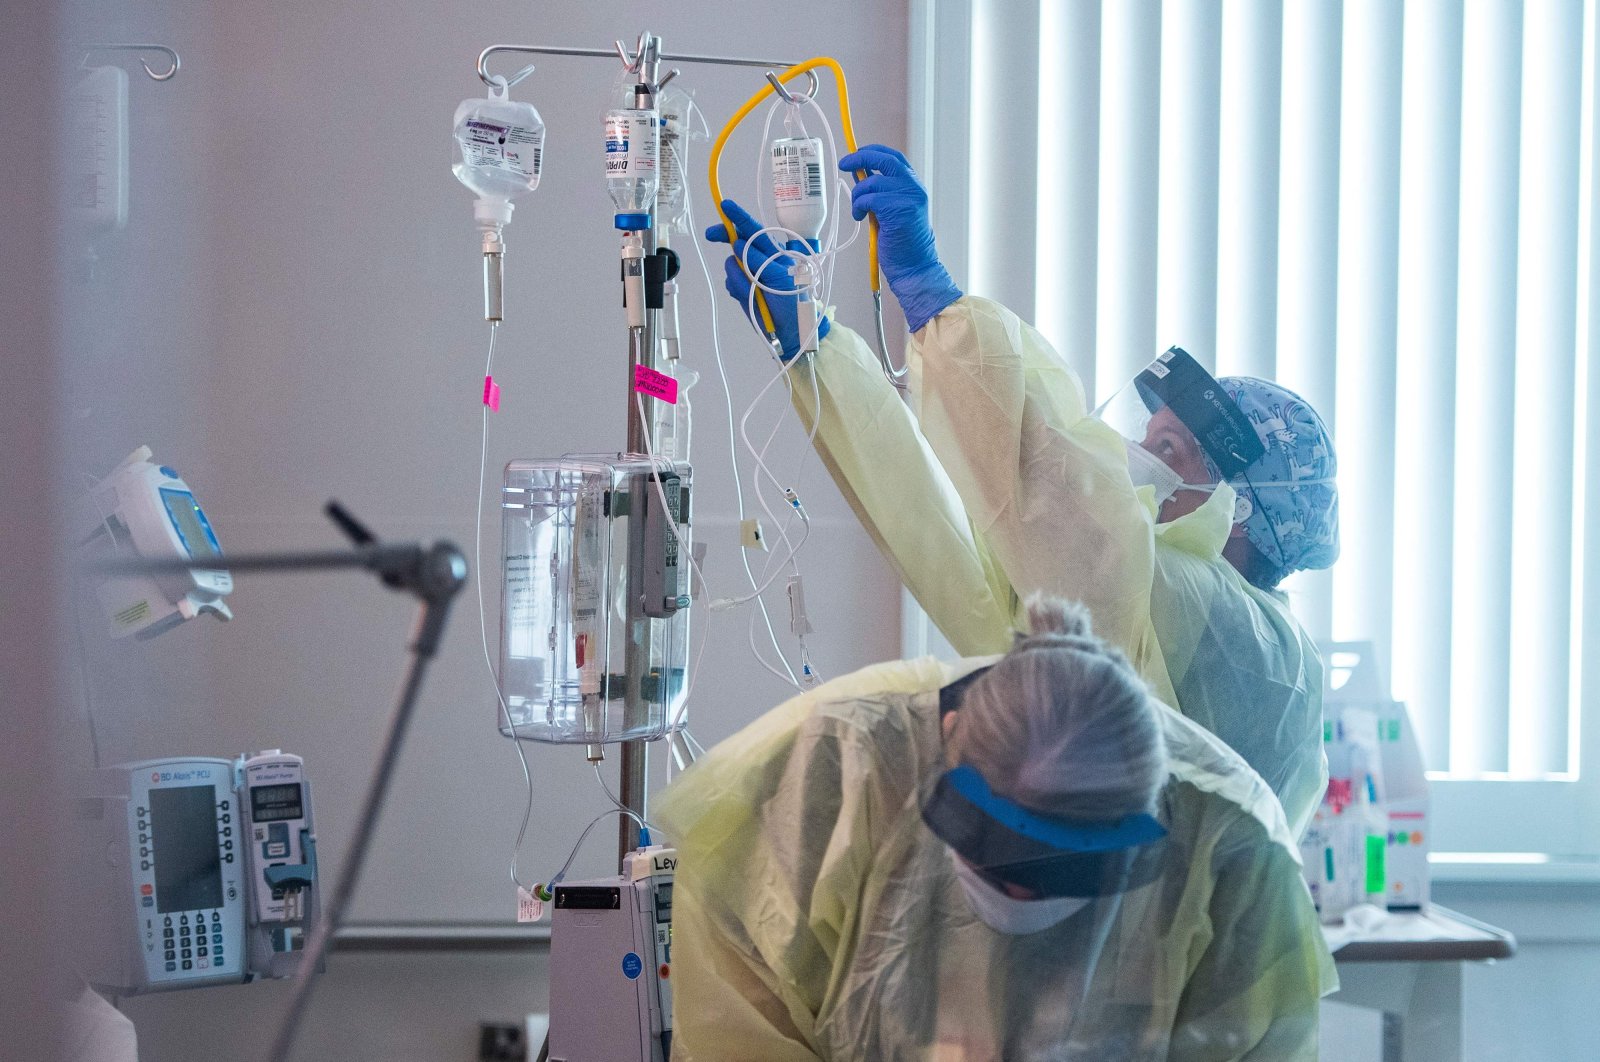 Nurses care for a COVID-19 patient inside the ICU at Adventist Health in Sonora, California, U.S, Aug. 27, 2021. (Photo by AFP)